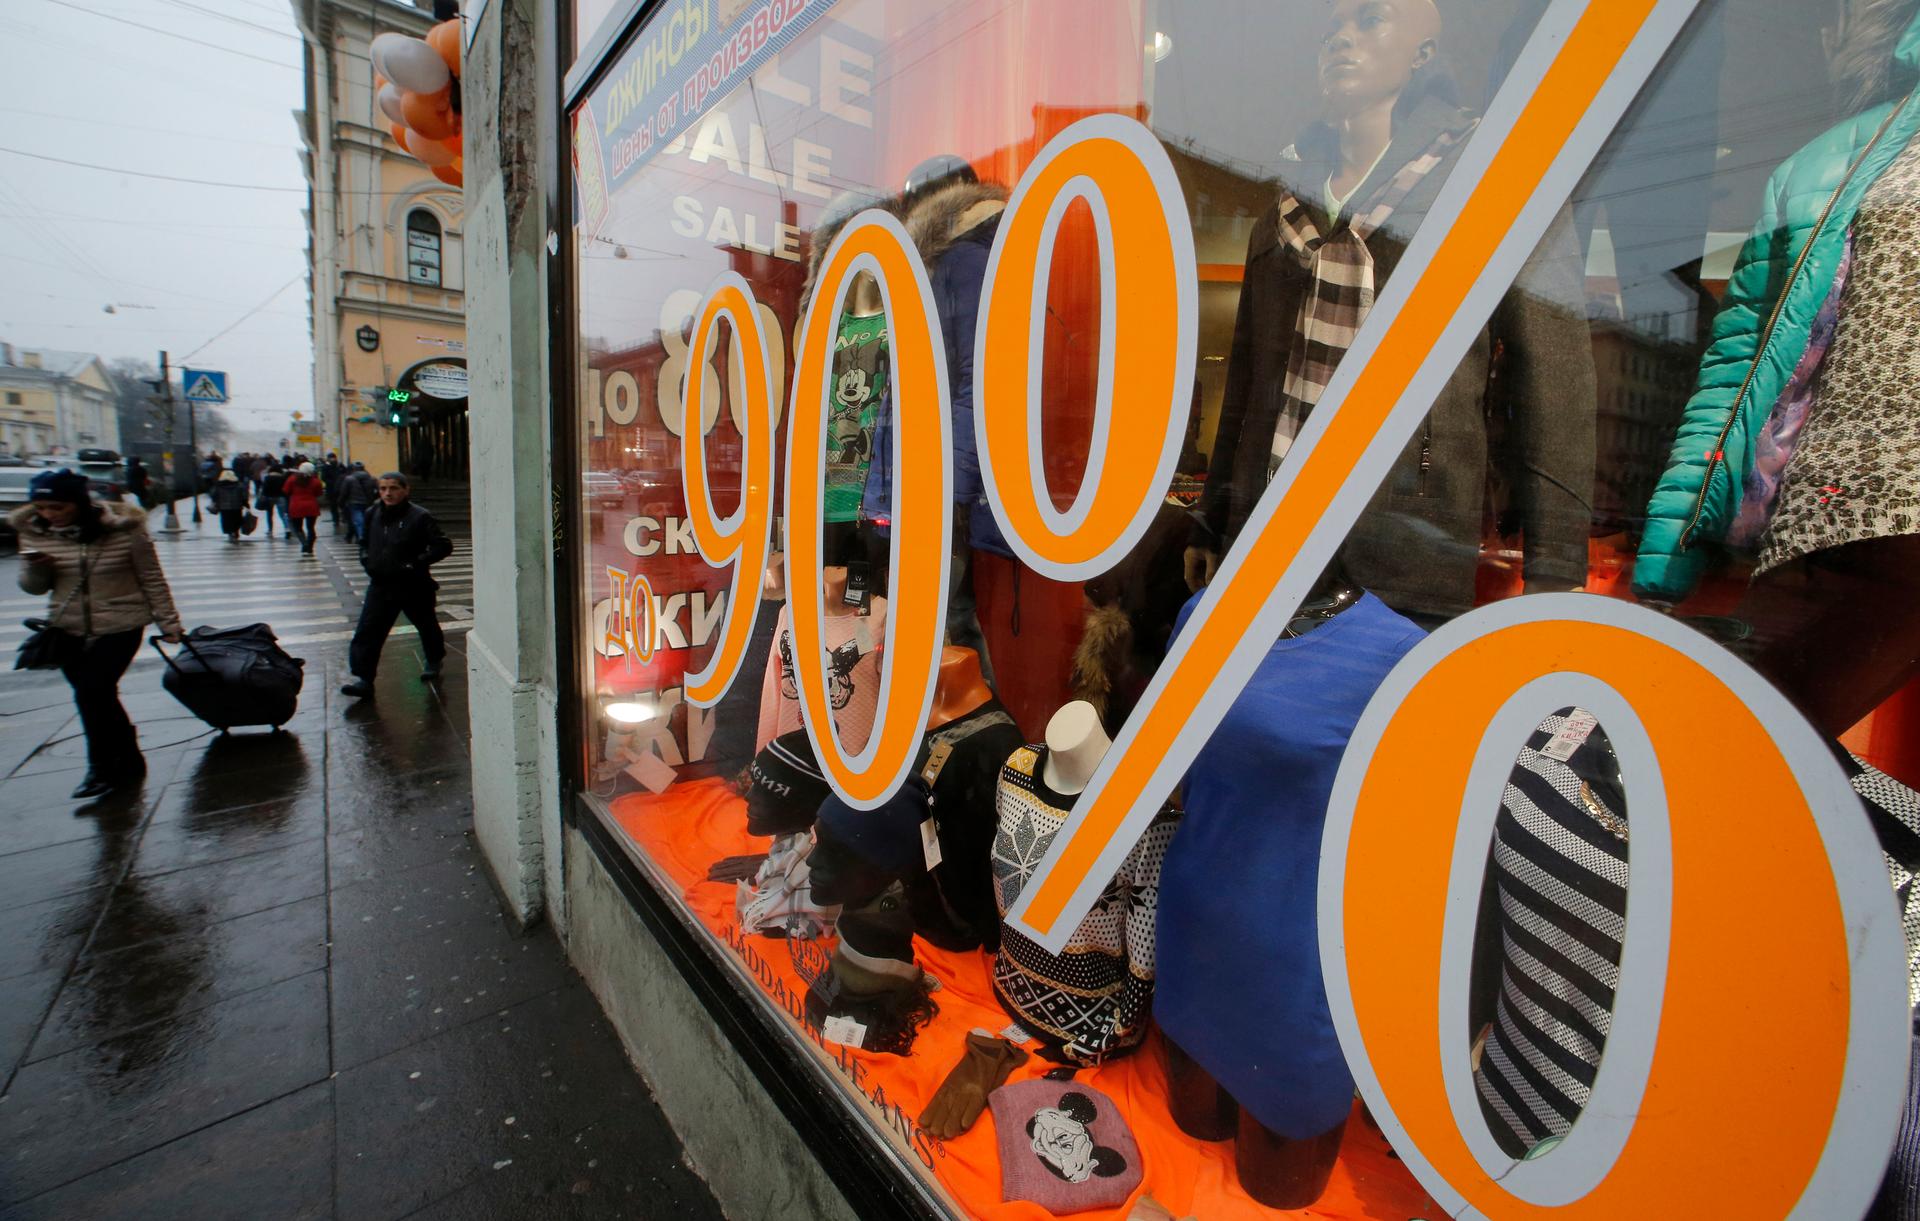 A St. Petersburg shop advertises a sale as Russia's ruble crashes to unprecedented lows Tuesday.